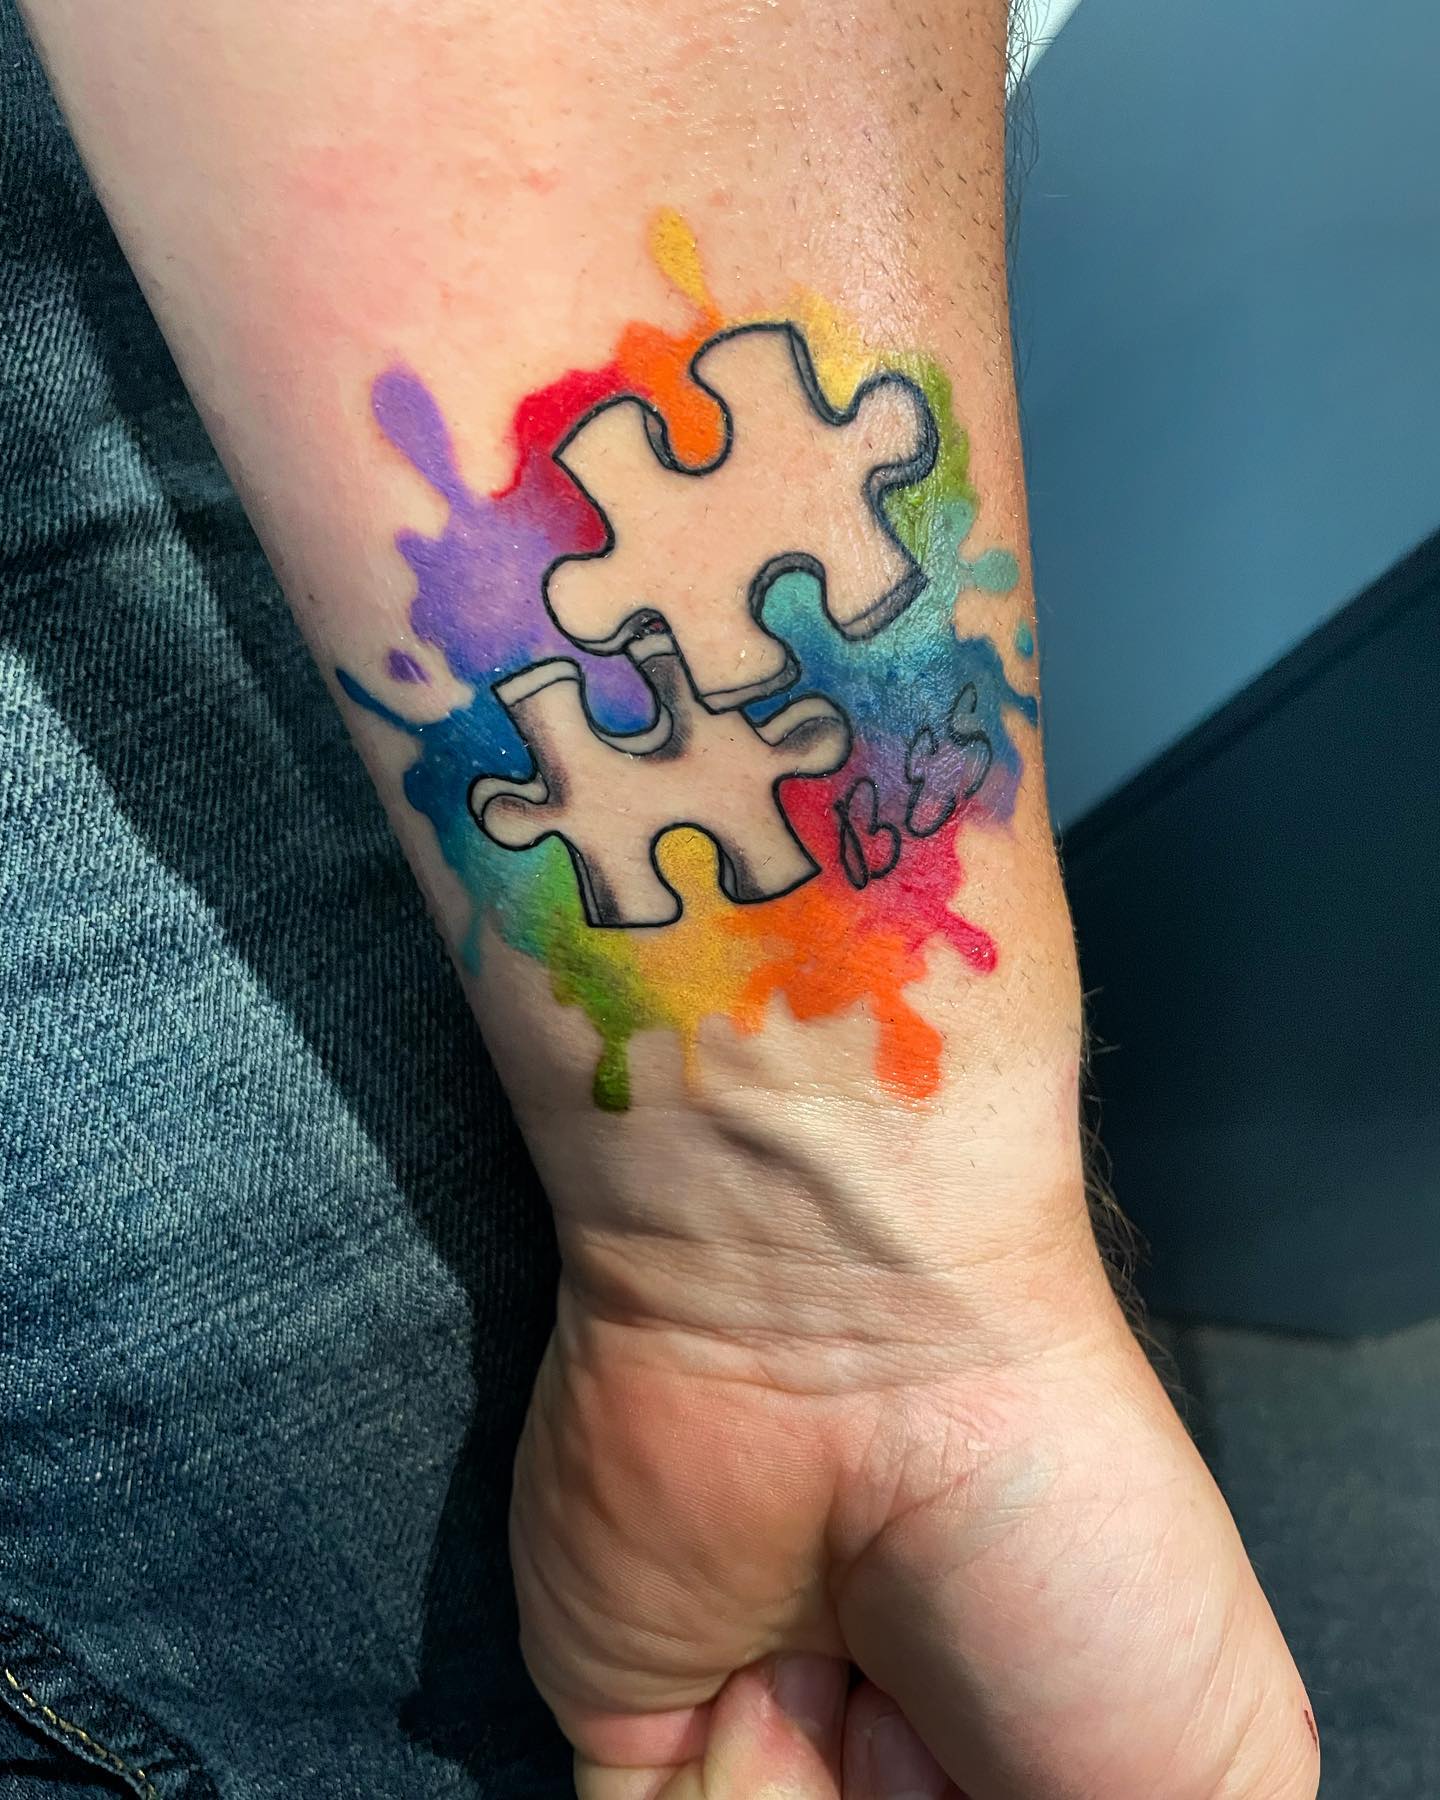 This puzzle piece tattoo with bright loud colors will make an impact at all times.